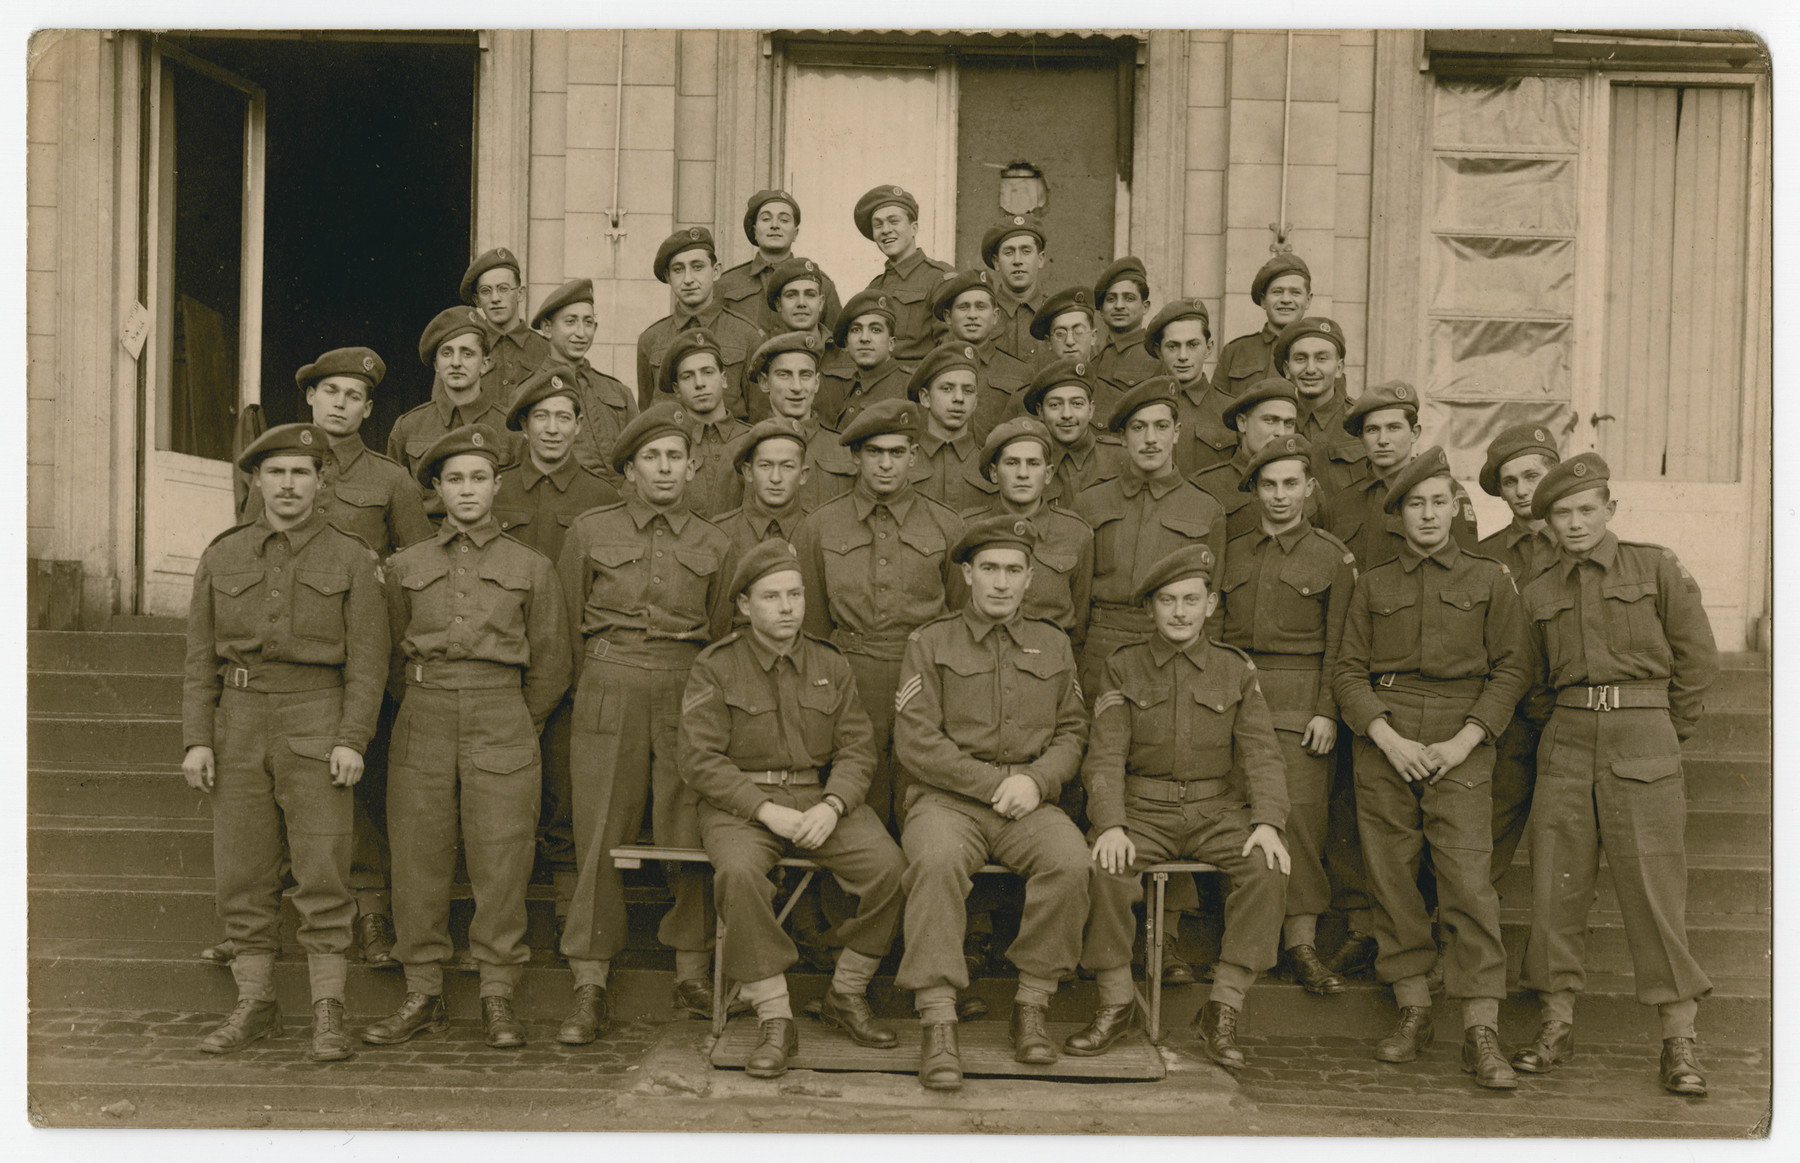 Group portrait of the members of the Third Battalion, Company A of the Jewish Brigade at their headquarters in Antwerp.

Among those pictured are Hersh Makowski, Eric Gross, Werner Szerevski and Zrubavel Horowitz.